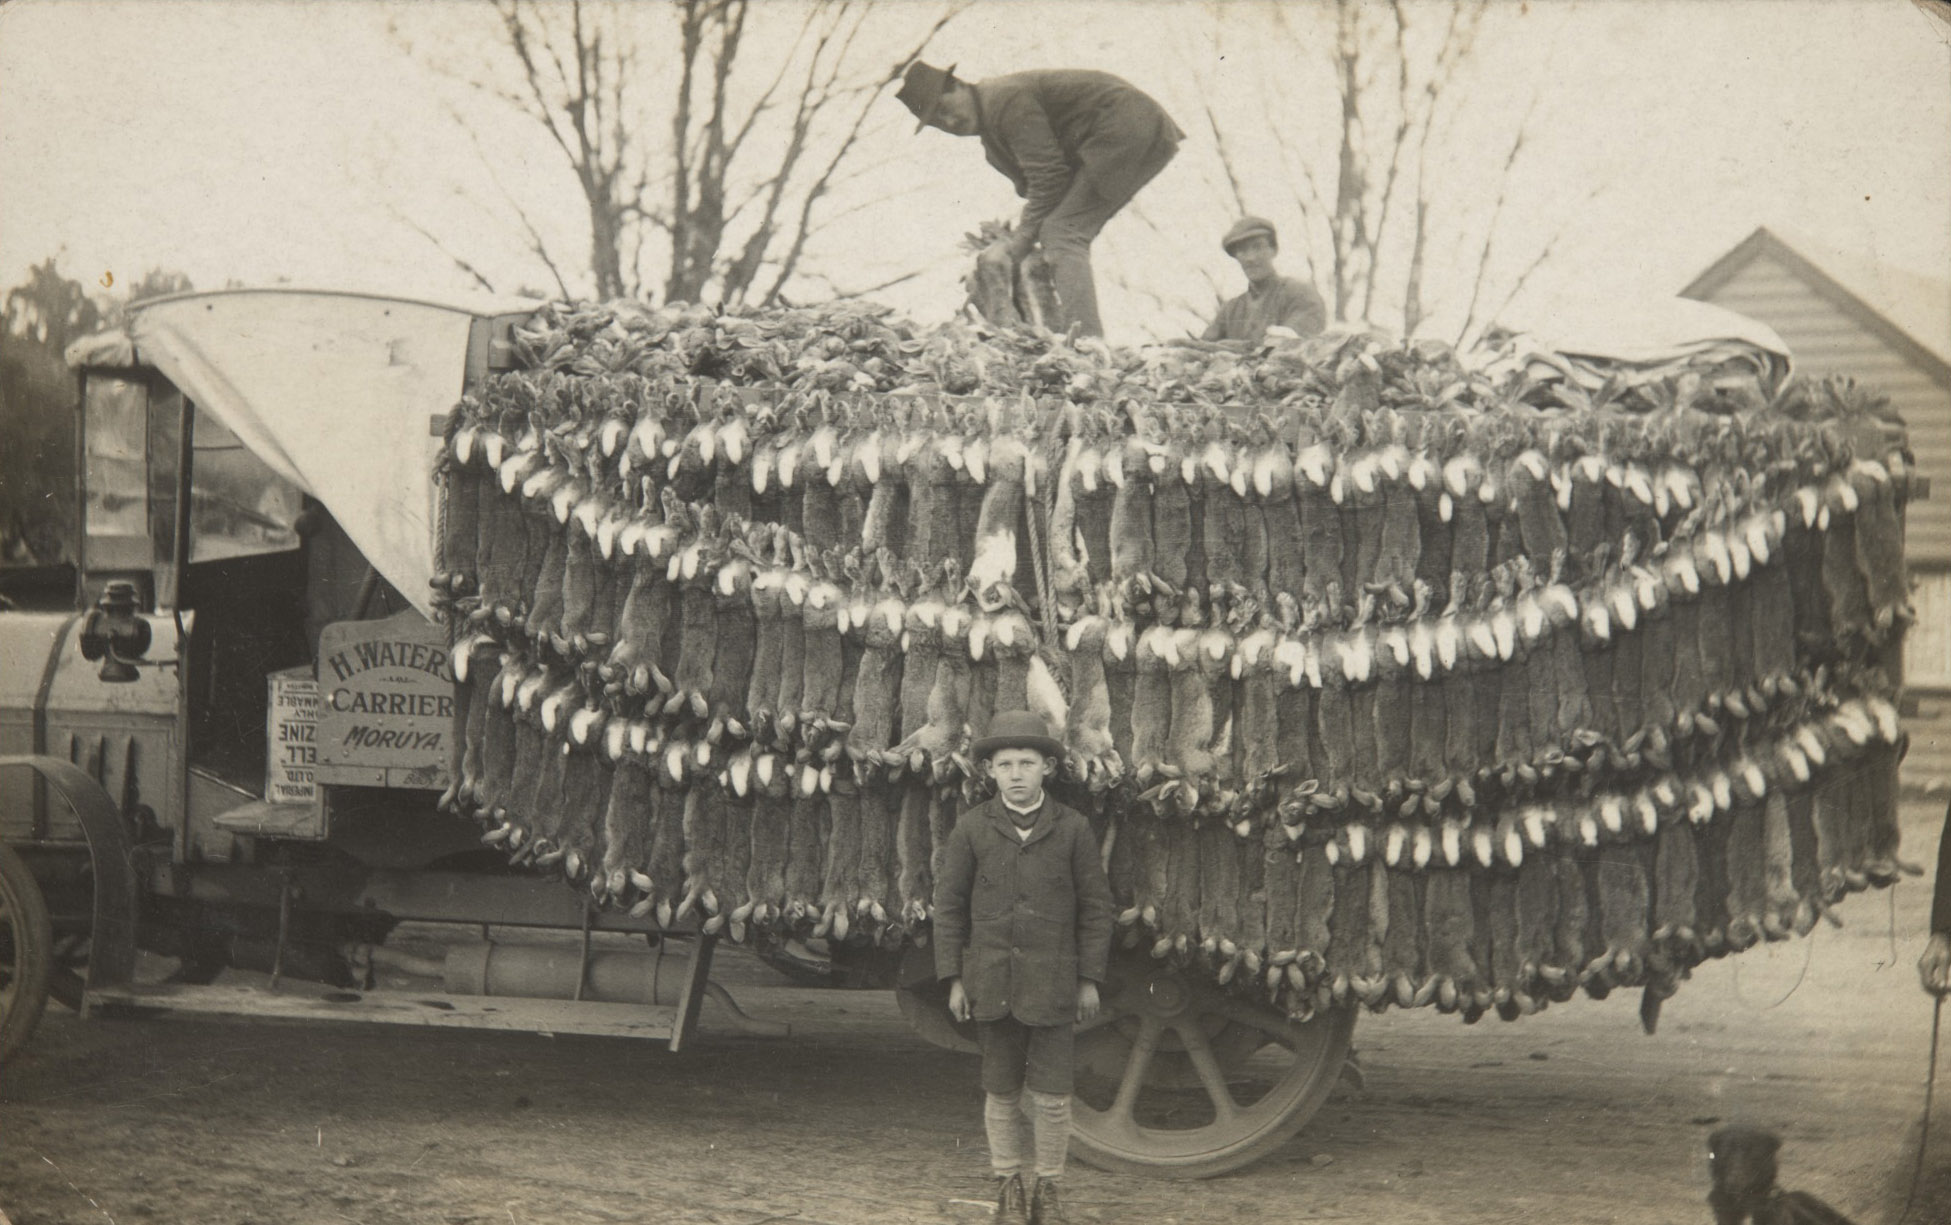 Lorry load of rabbits, Braidwood, NSW, photographed by Paul C. Nomchong.